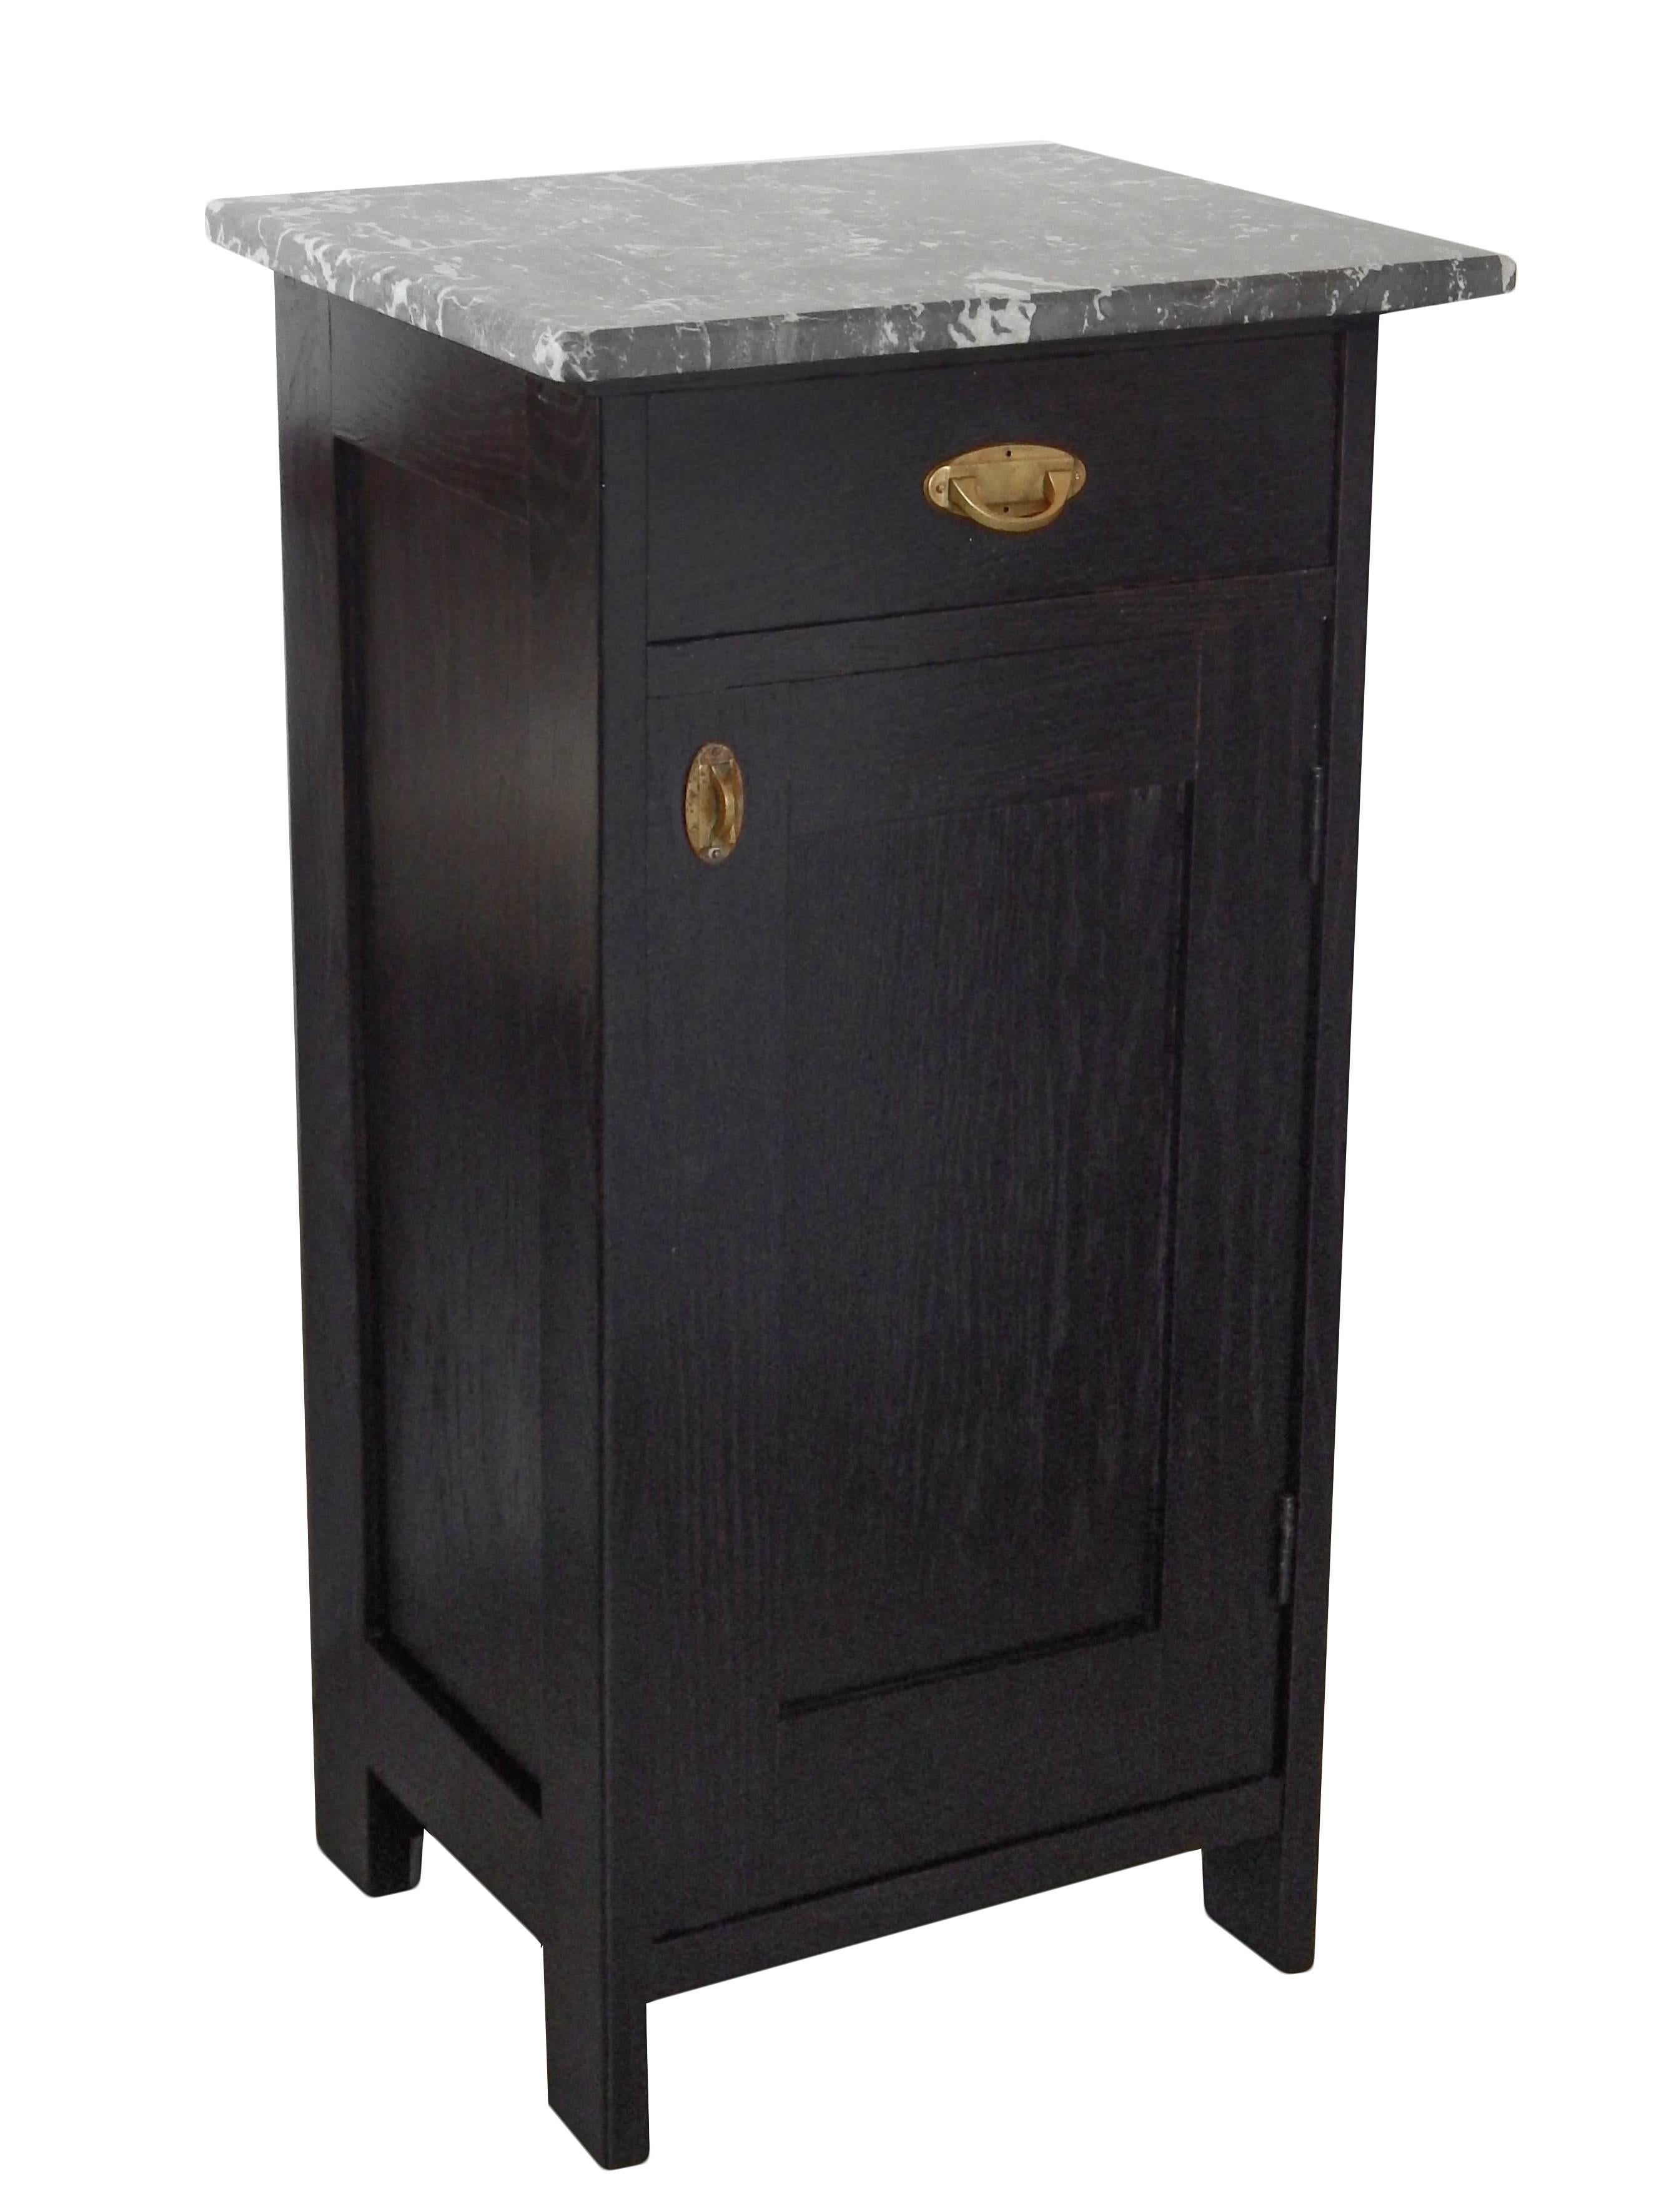 Pair of Ebonized Marble-Top Nightstands In Excellent Condition For Sale In Bridgehampton, NY